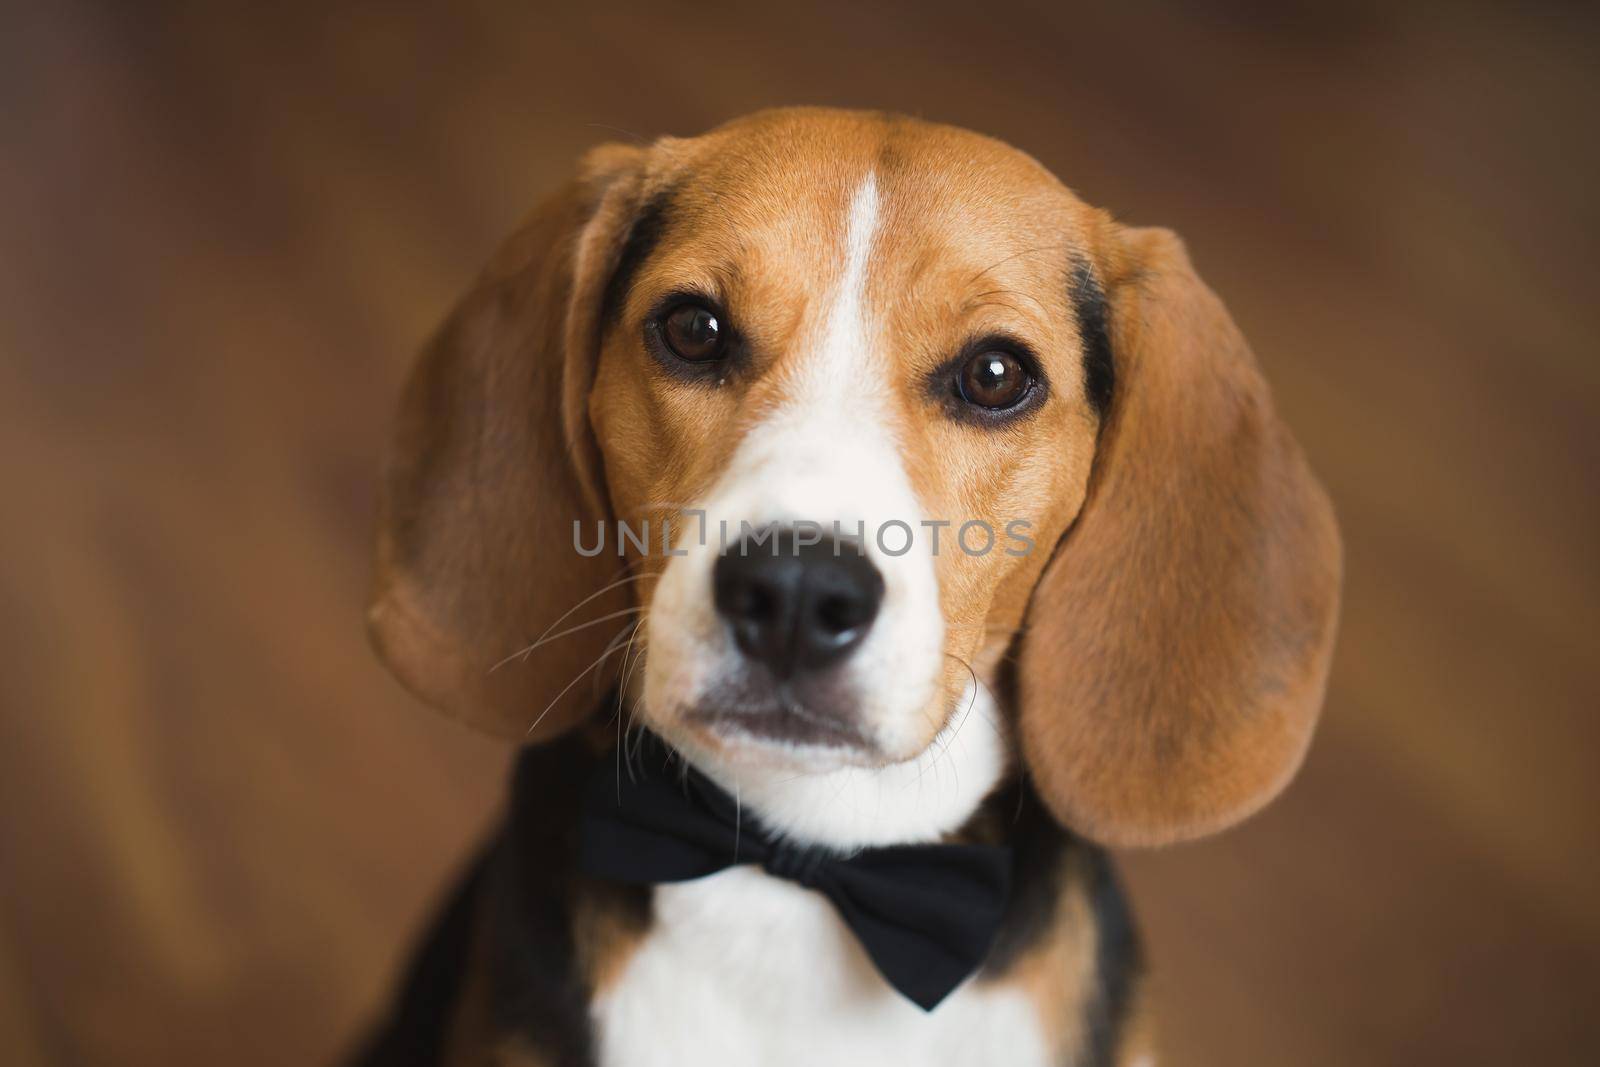 A smart dog in a bow tie at a wedding.